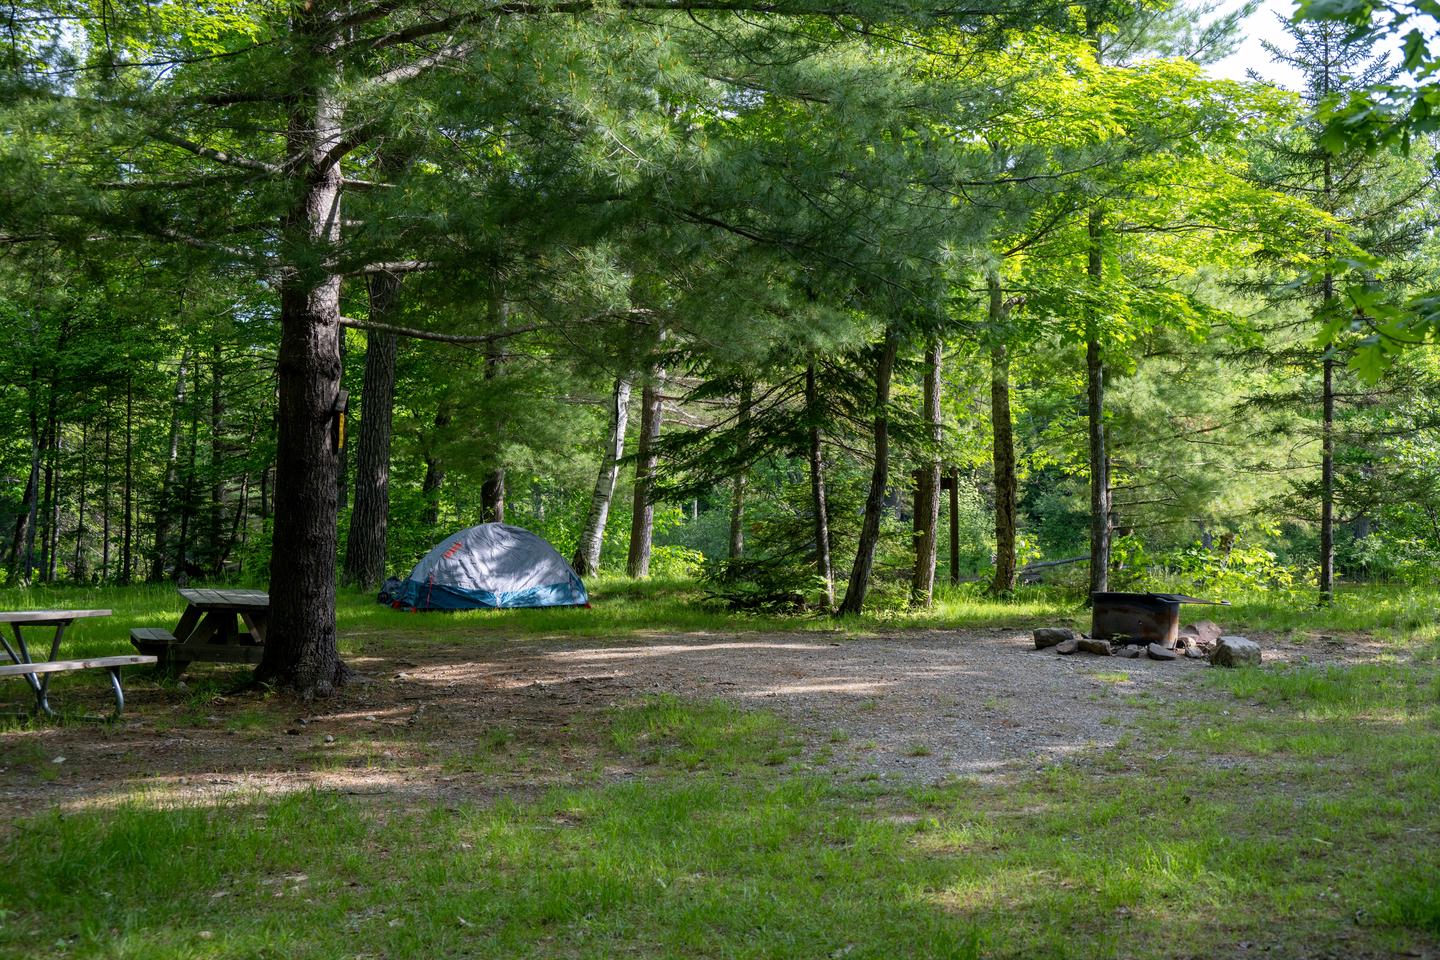 A large shaded campsite with two picnic tables a small tent and a metal campfire ring on a leveled gravel surface.Upper East Branch campsite is a larger shaded campsite next the East Branch of the Penobscot River.